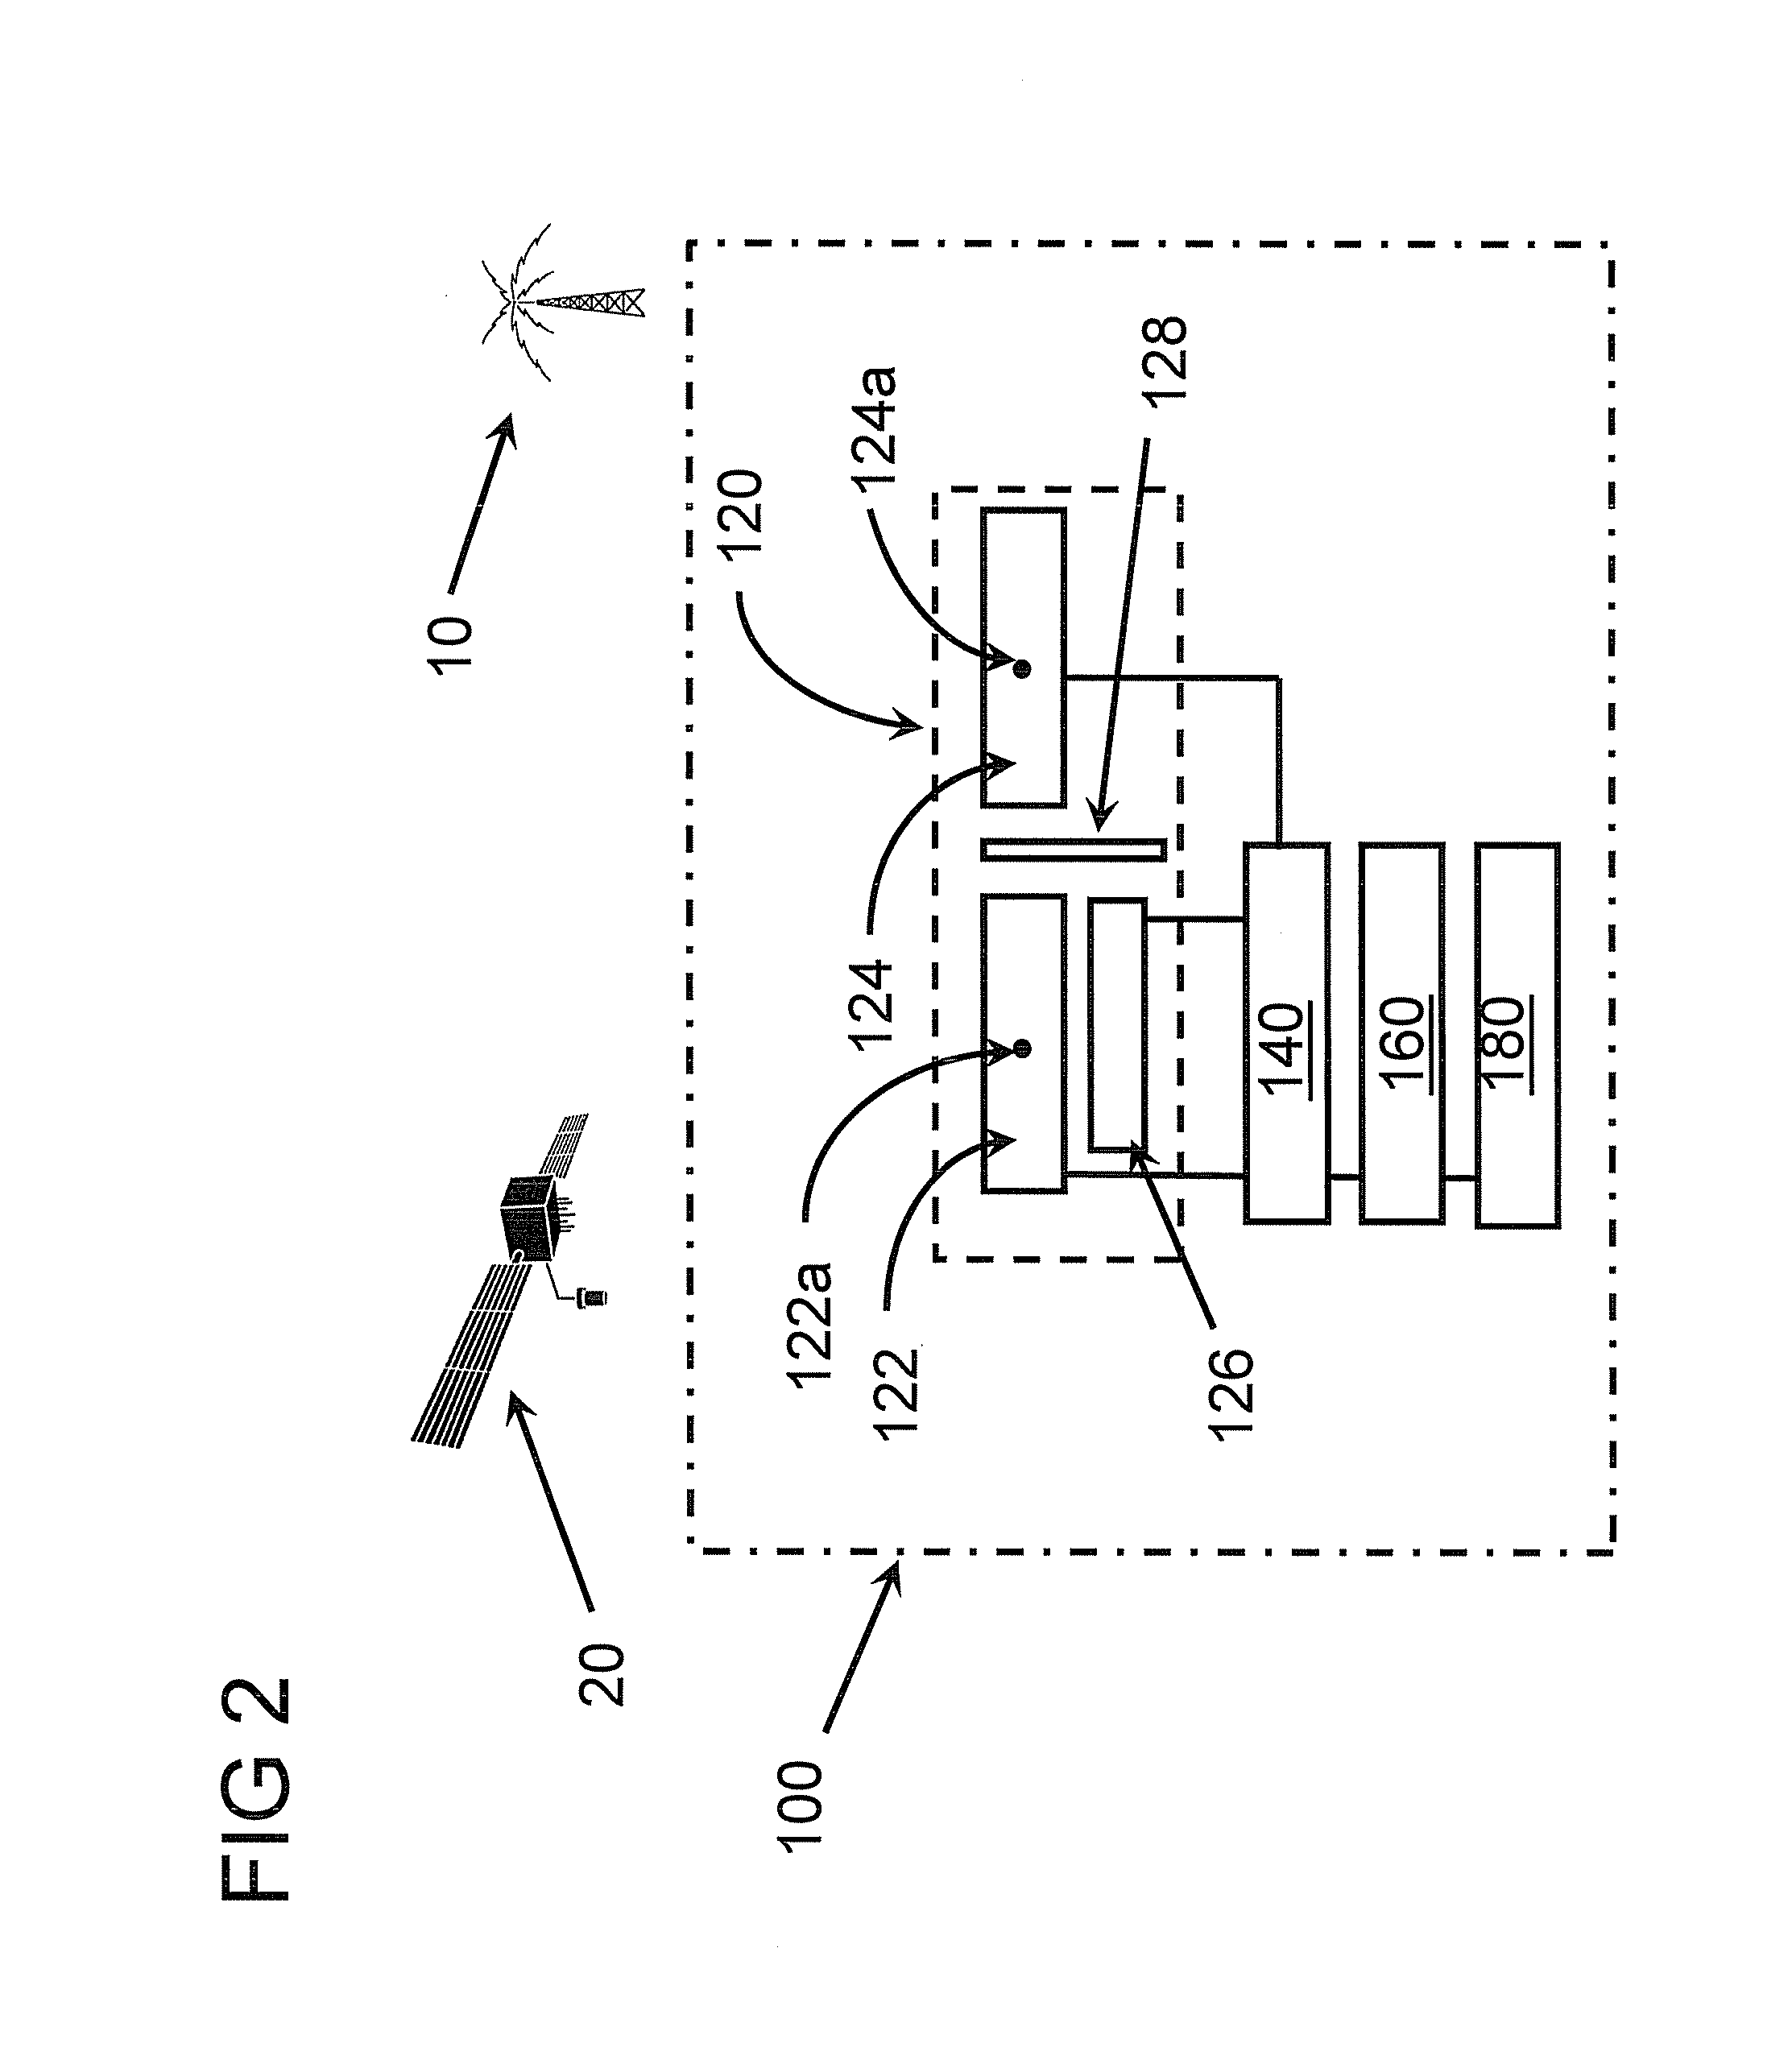 Methods, systems, and computer readable media for mitigation of in-band interference of global positioning system (GPS) signals